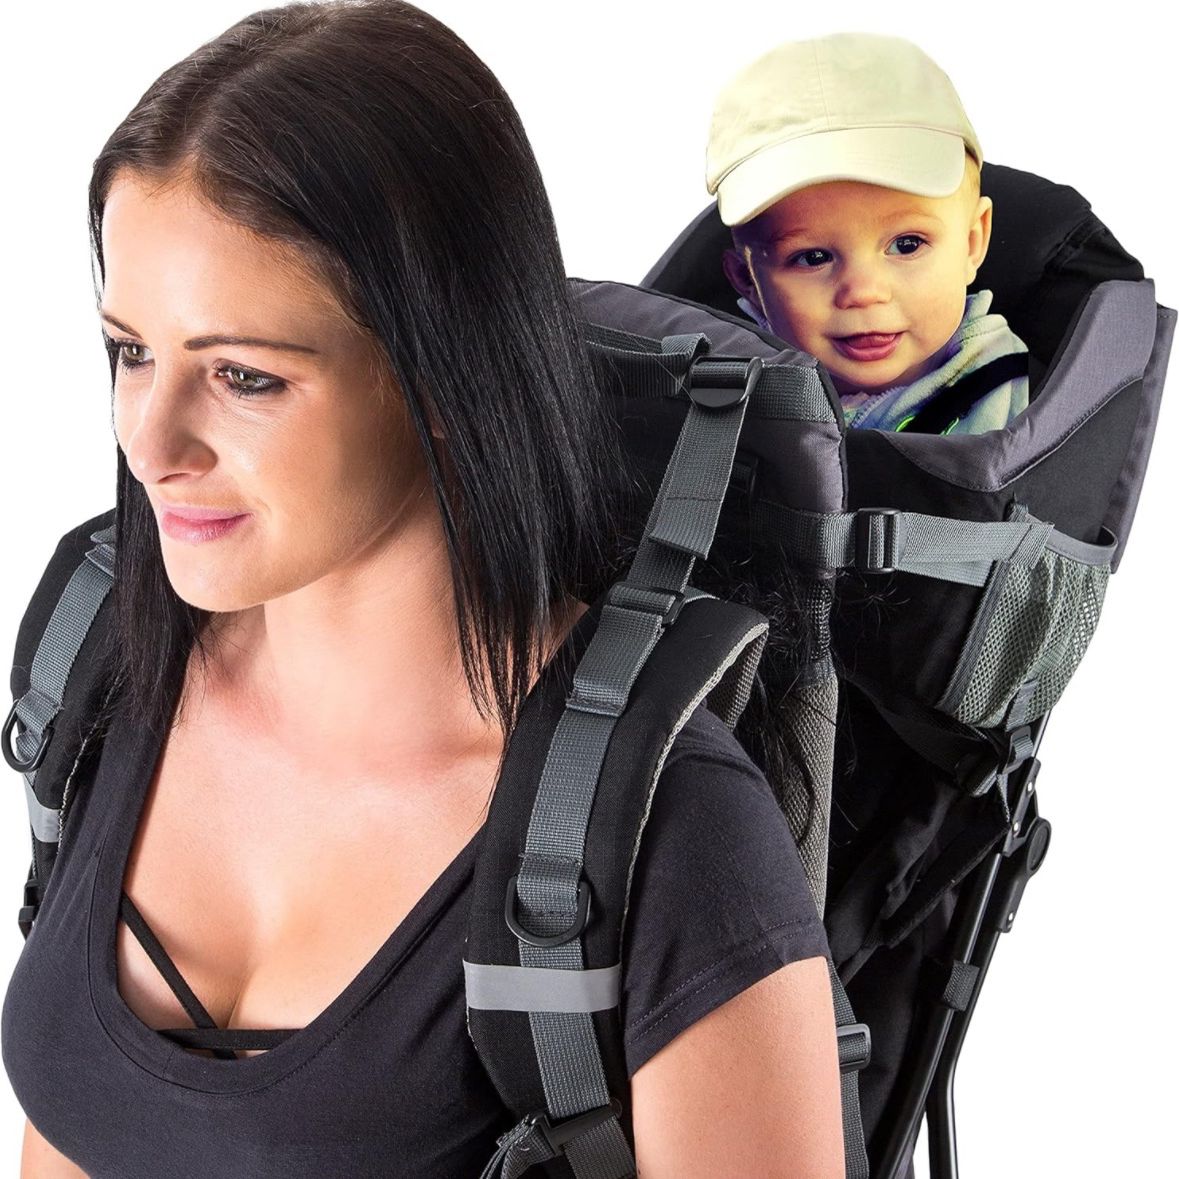 Hiking Baby Carrier Backpack 